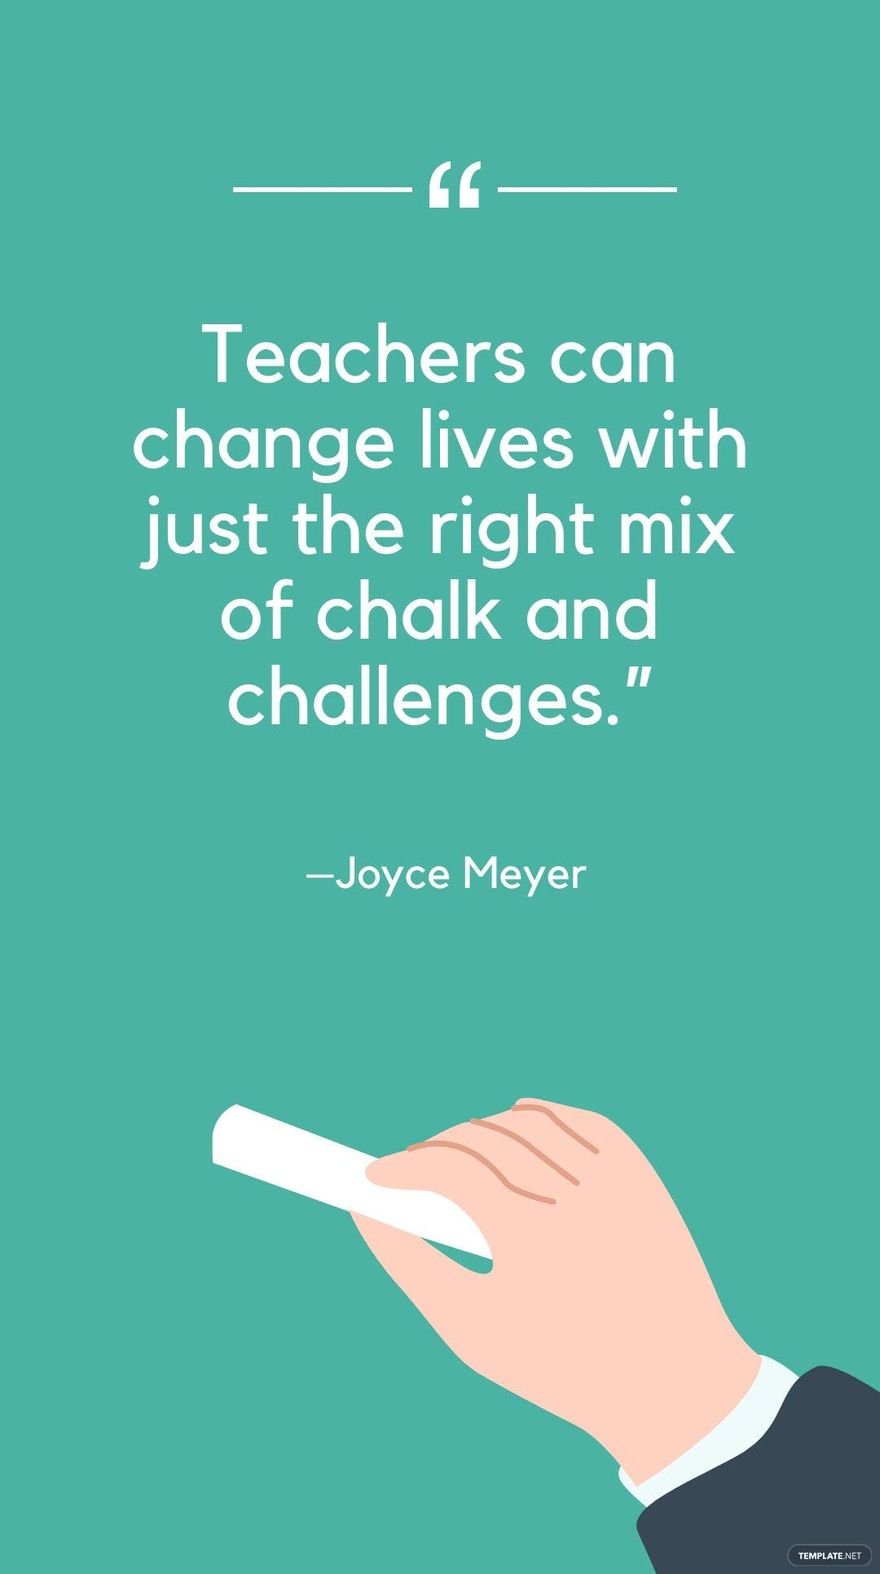 Free Joyce Meyer - Teachers can change lives with just the right mix of chalk and challenges. in JPG